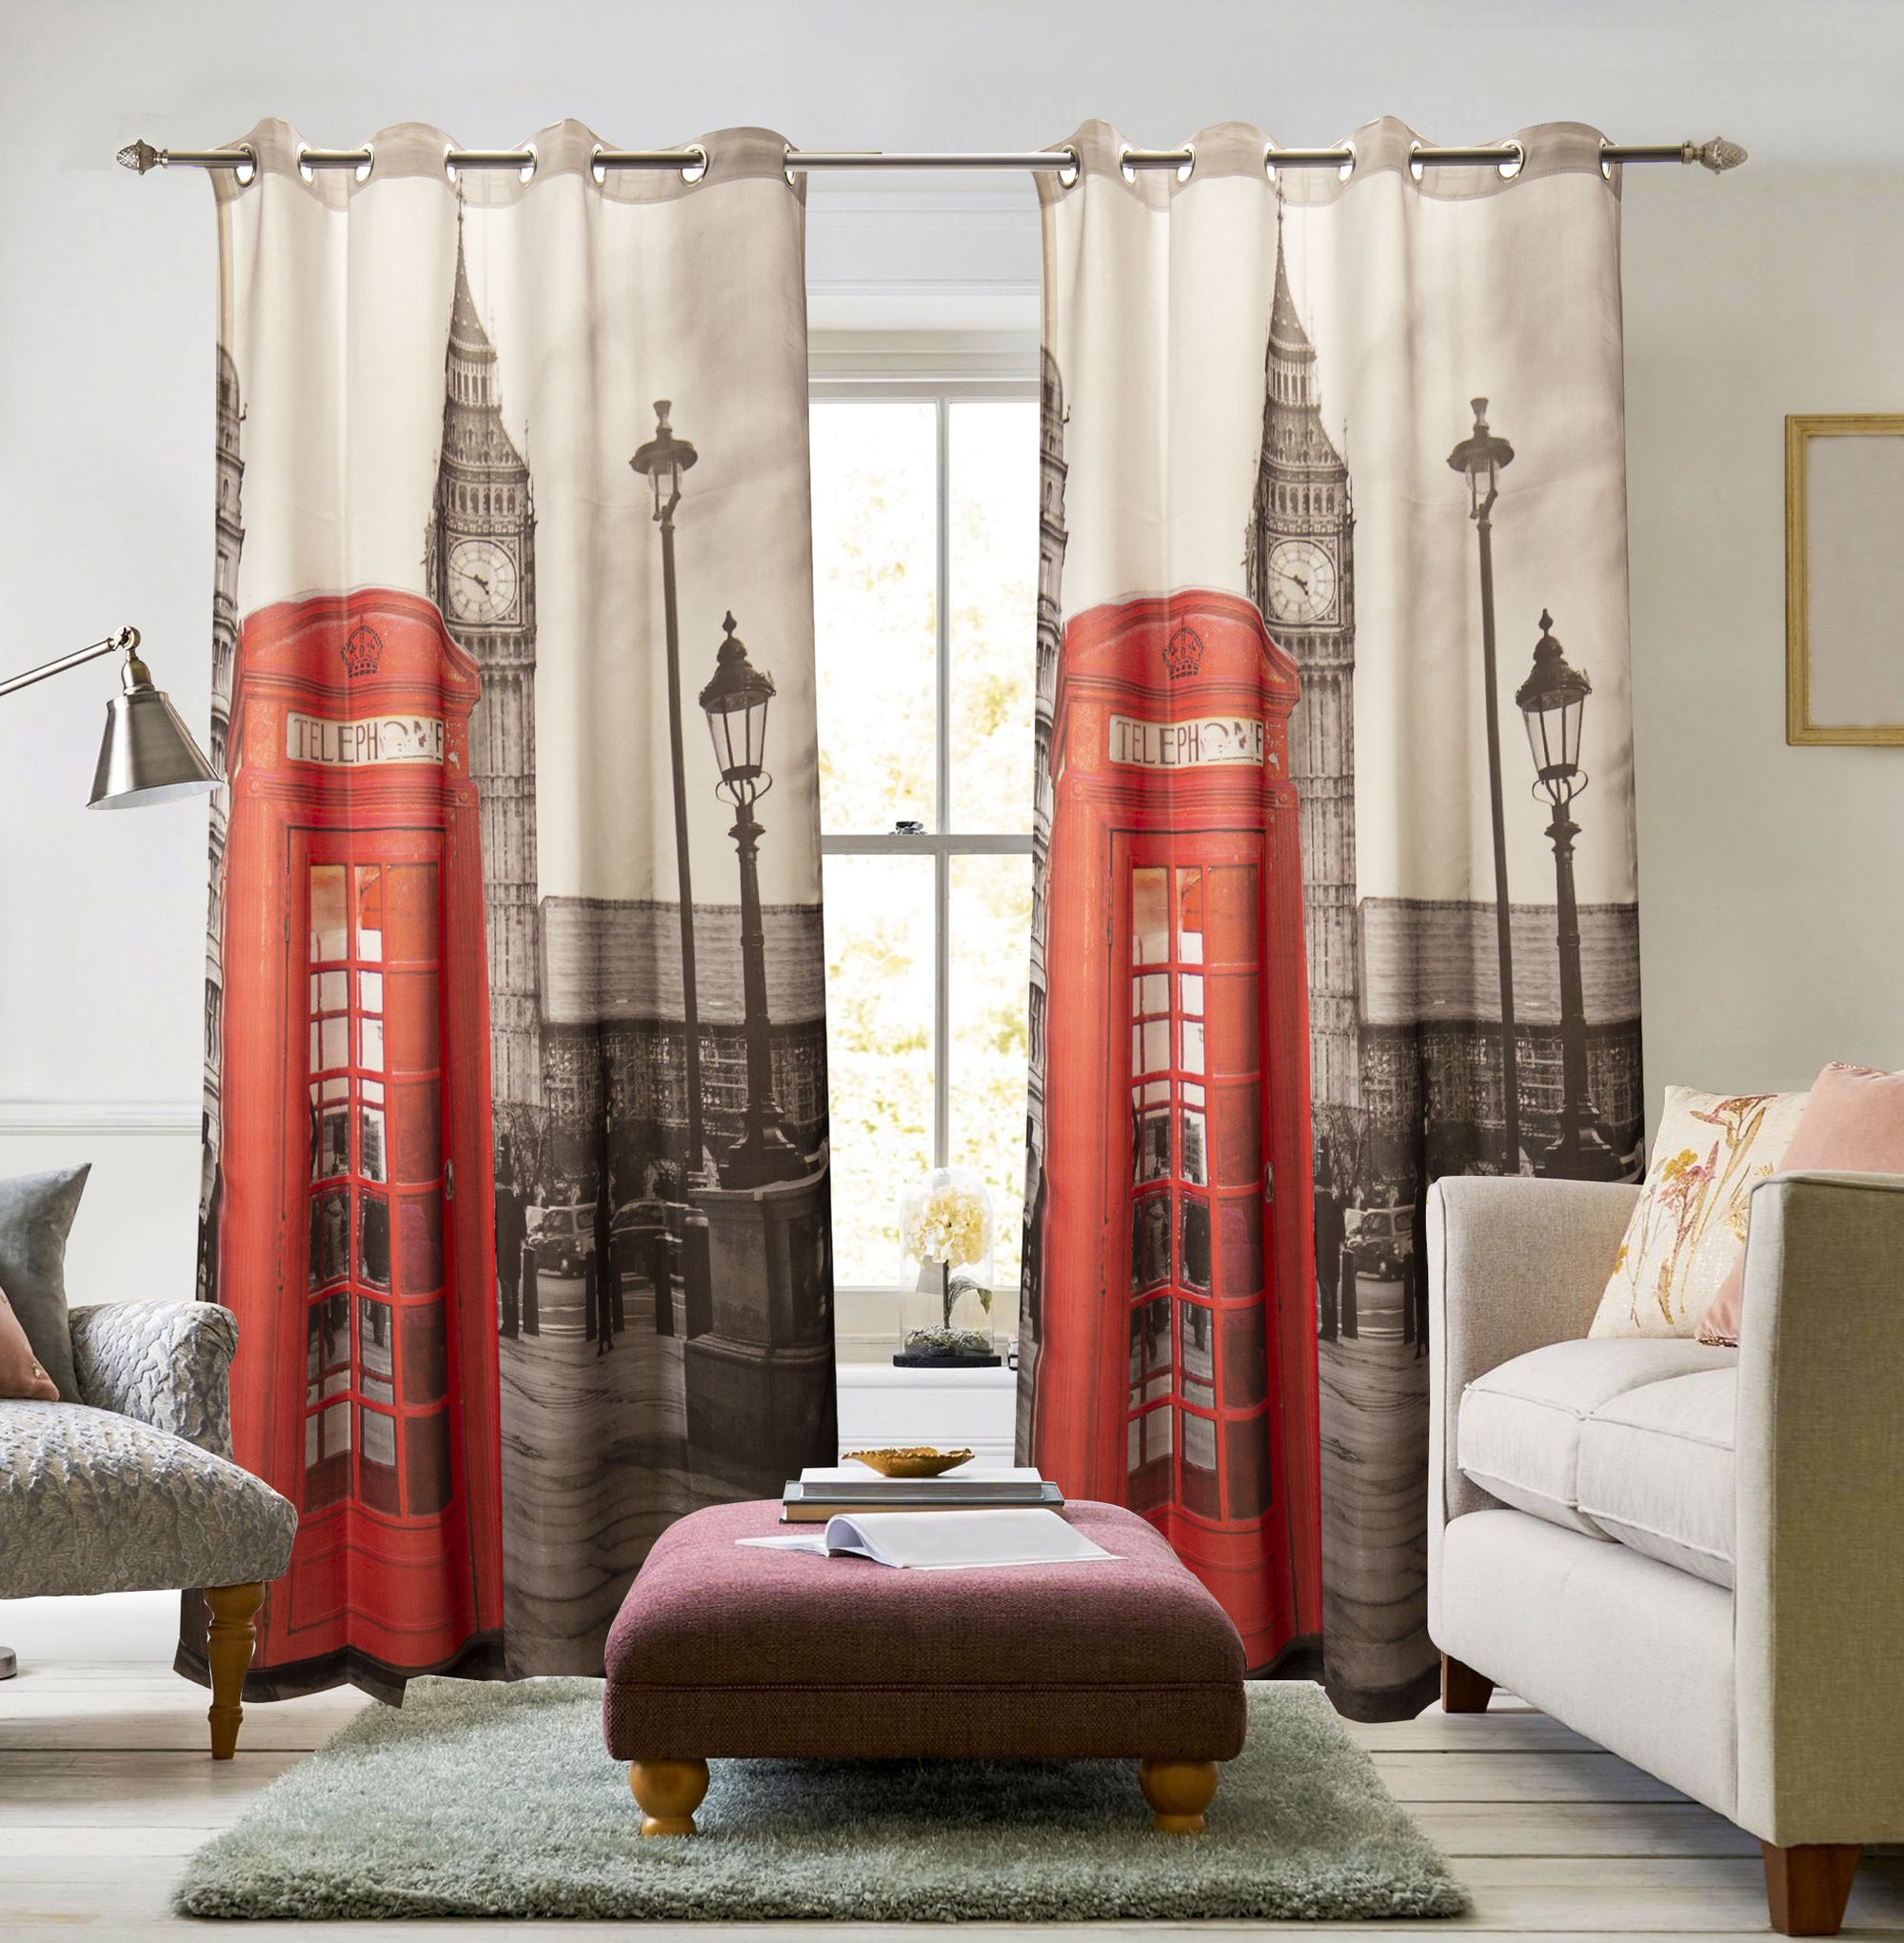 Printed Luxury Design& Curtain styles Ready Made Velvet Curtains 94 x 54 in